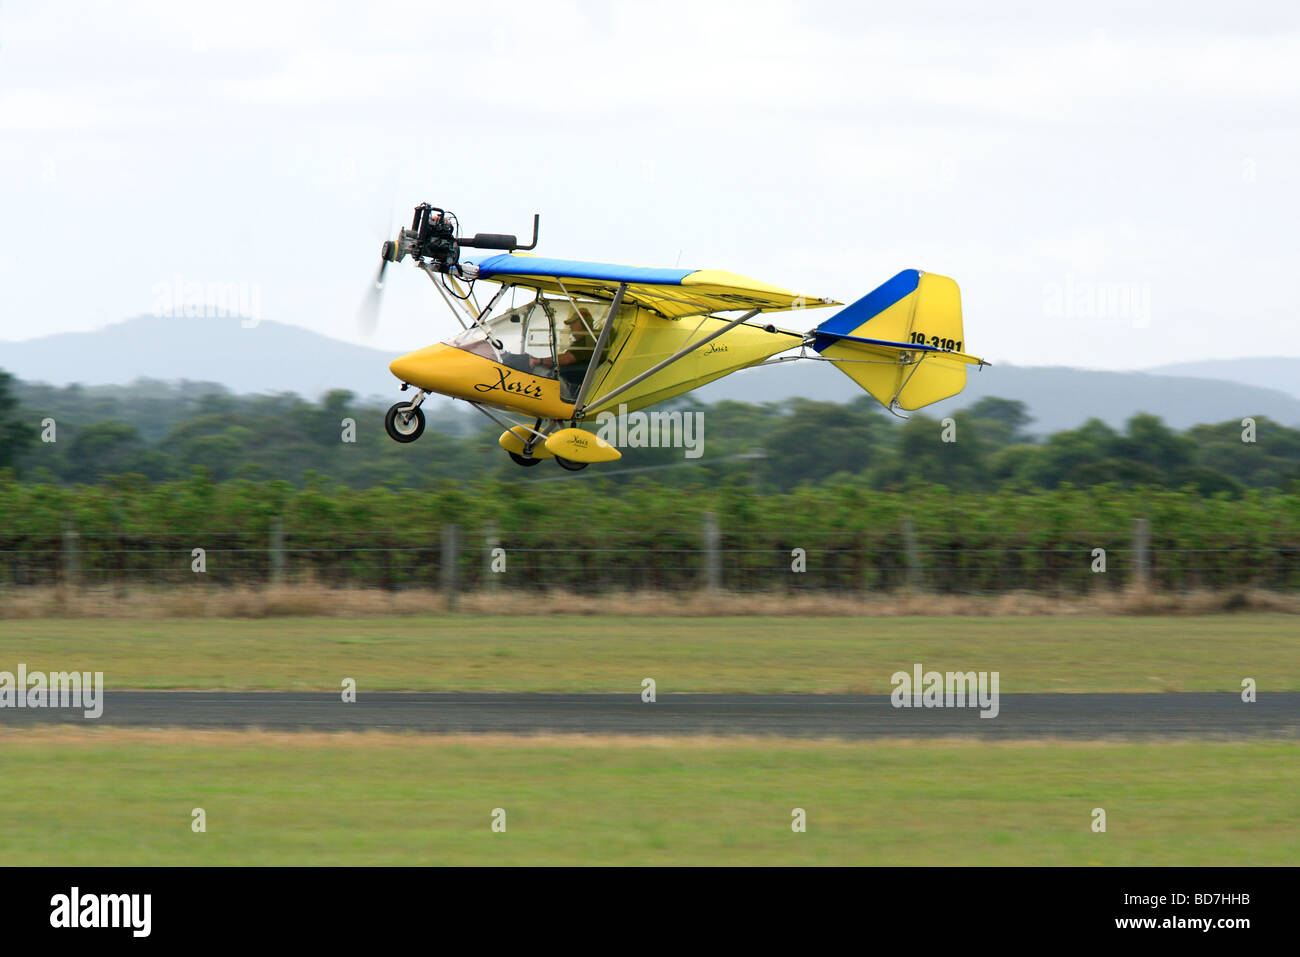 X air ultralight aircraft just after takeoff Stock Photo